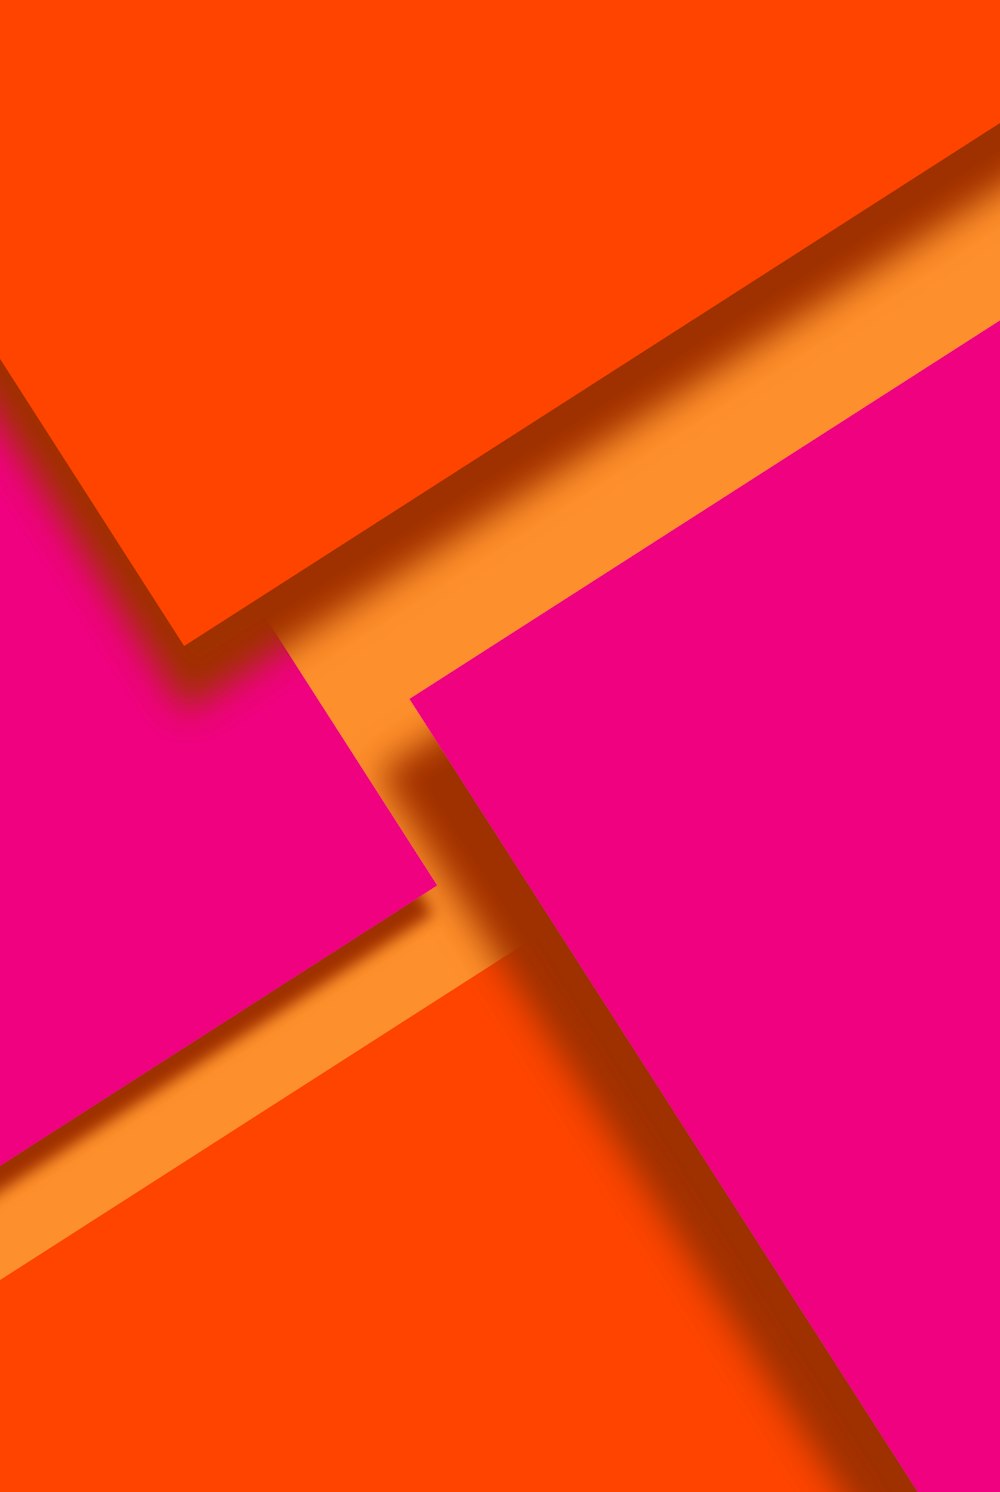 a close up of a cell phone with an orange and pink background